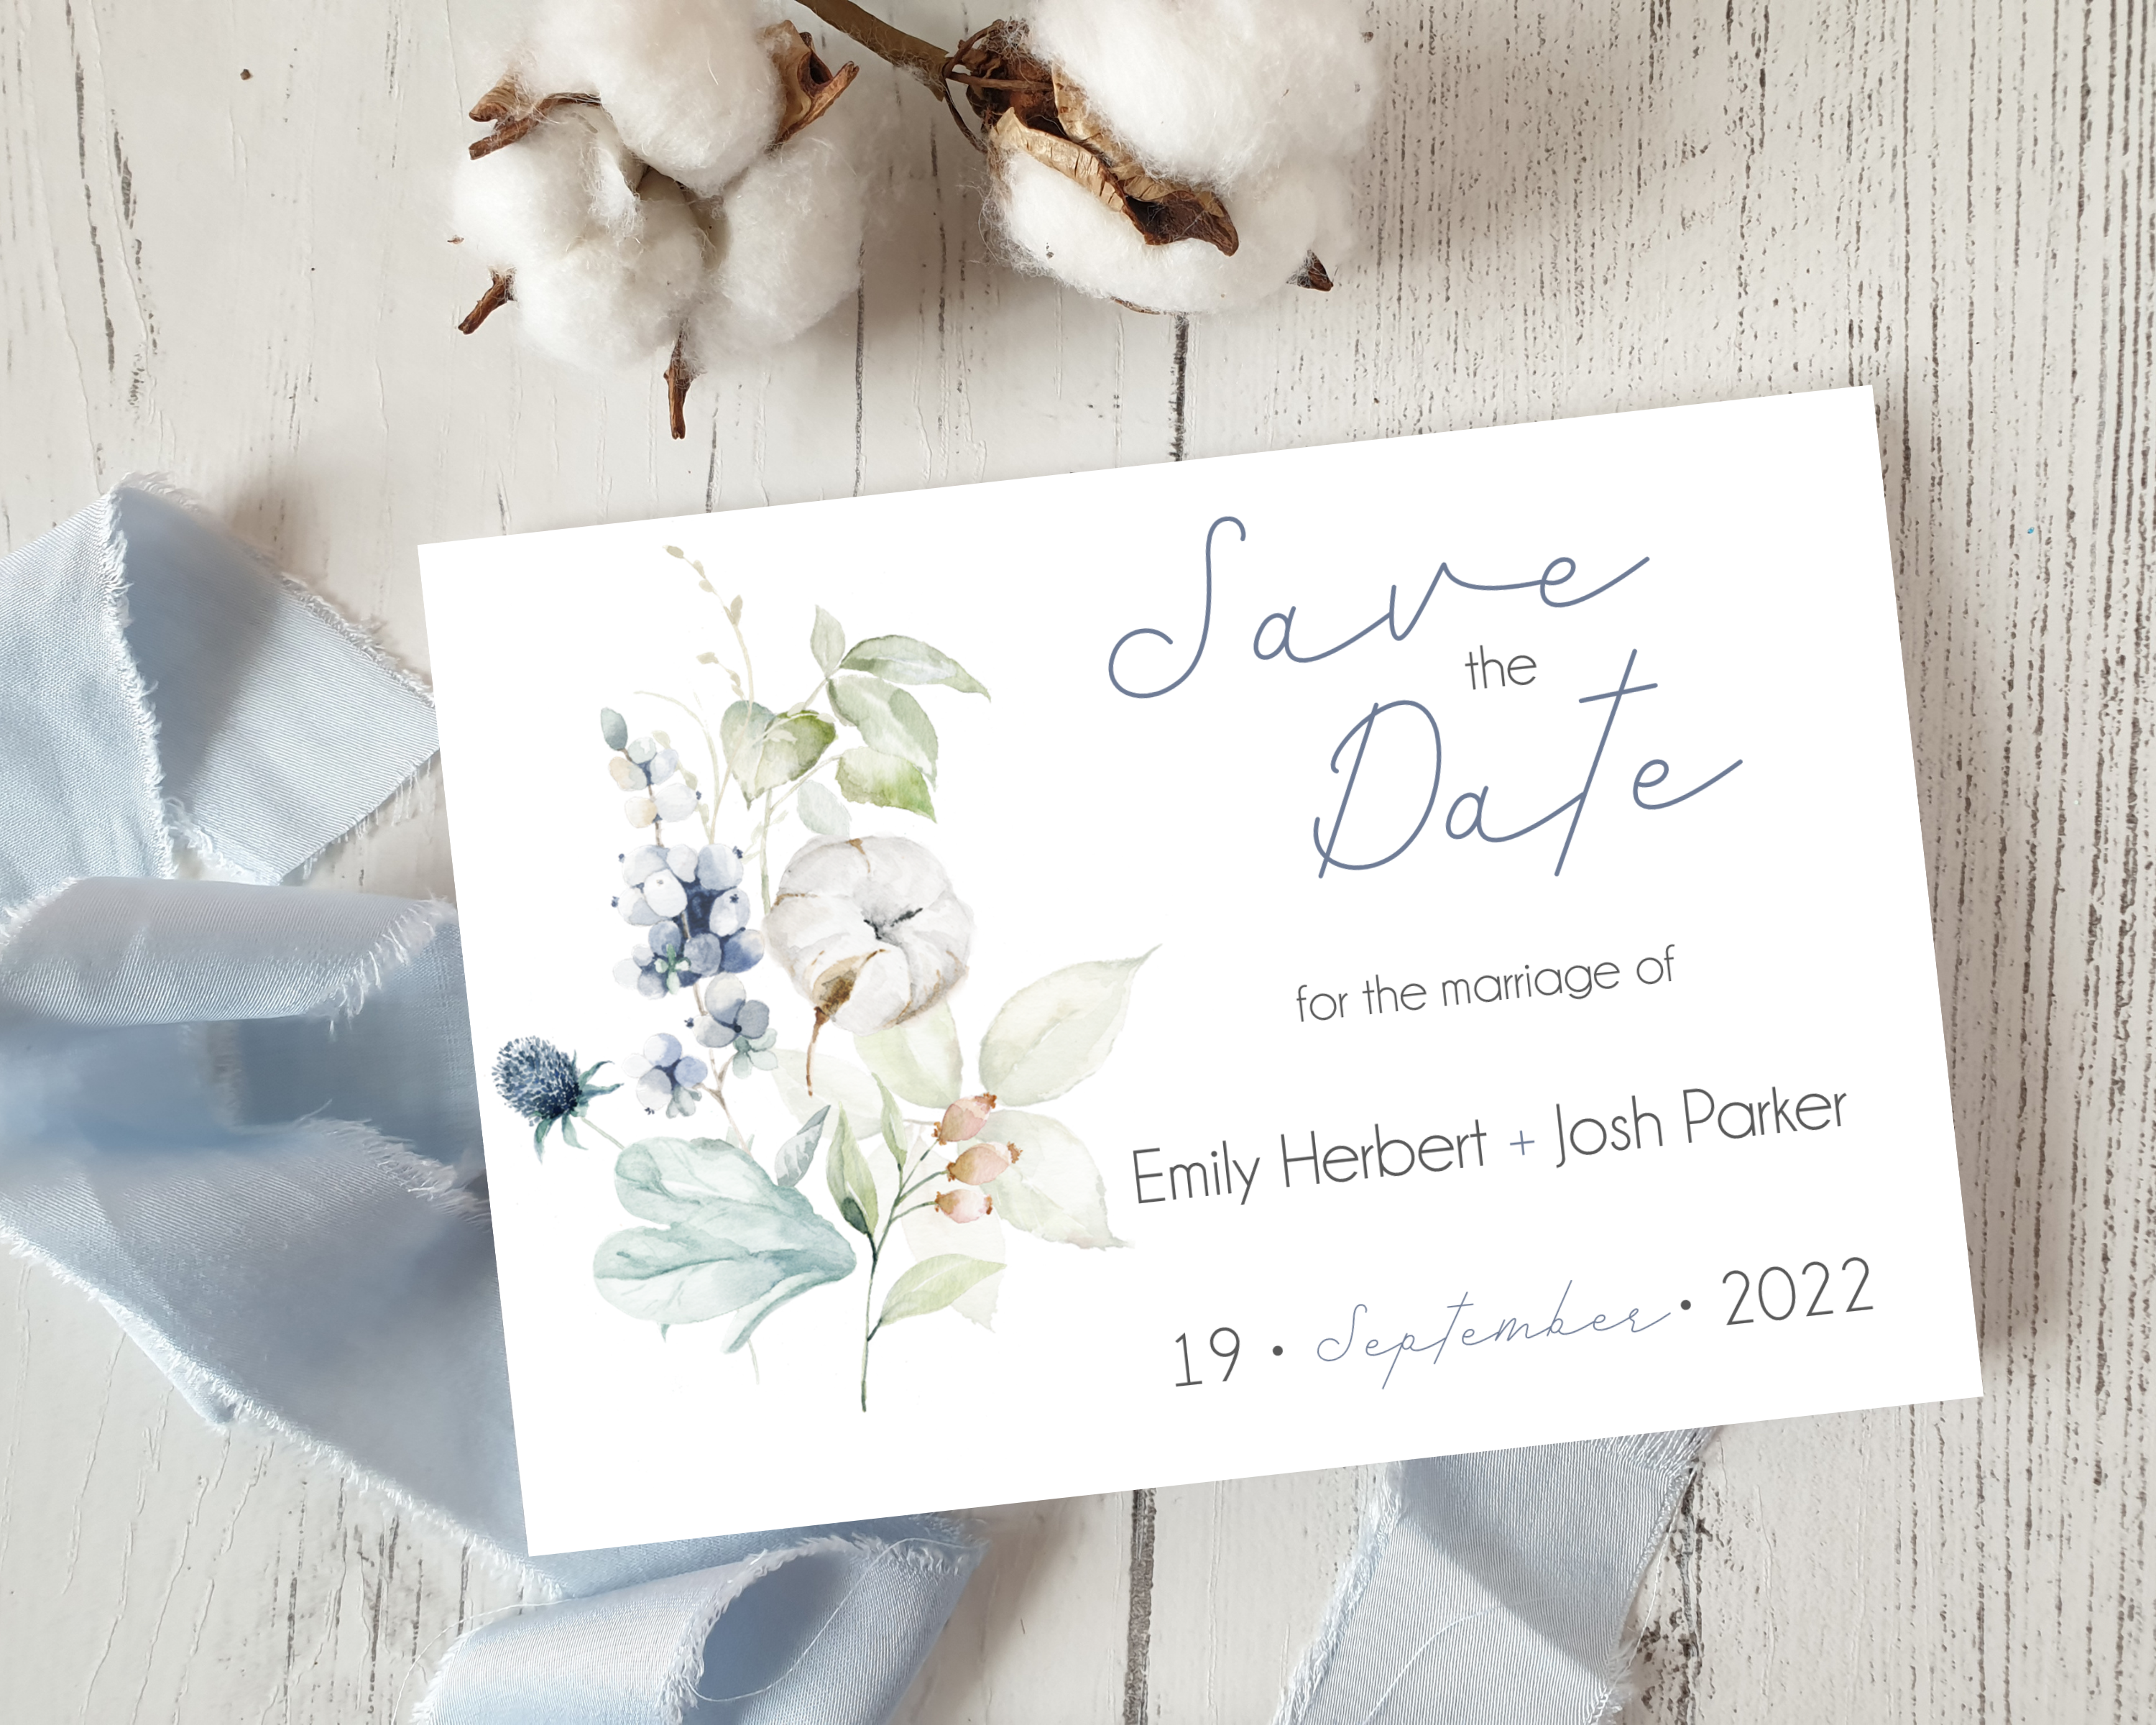 Dusty blue & cotton flowers Poppleberry A6 wedding save the date card, with cotton tufts and matching ribbon in background.